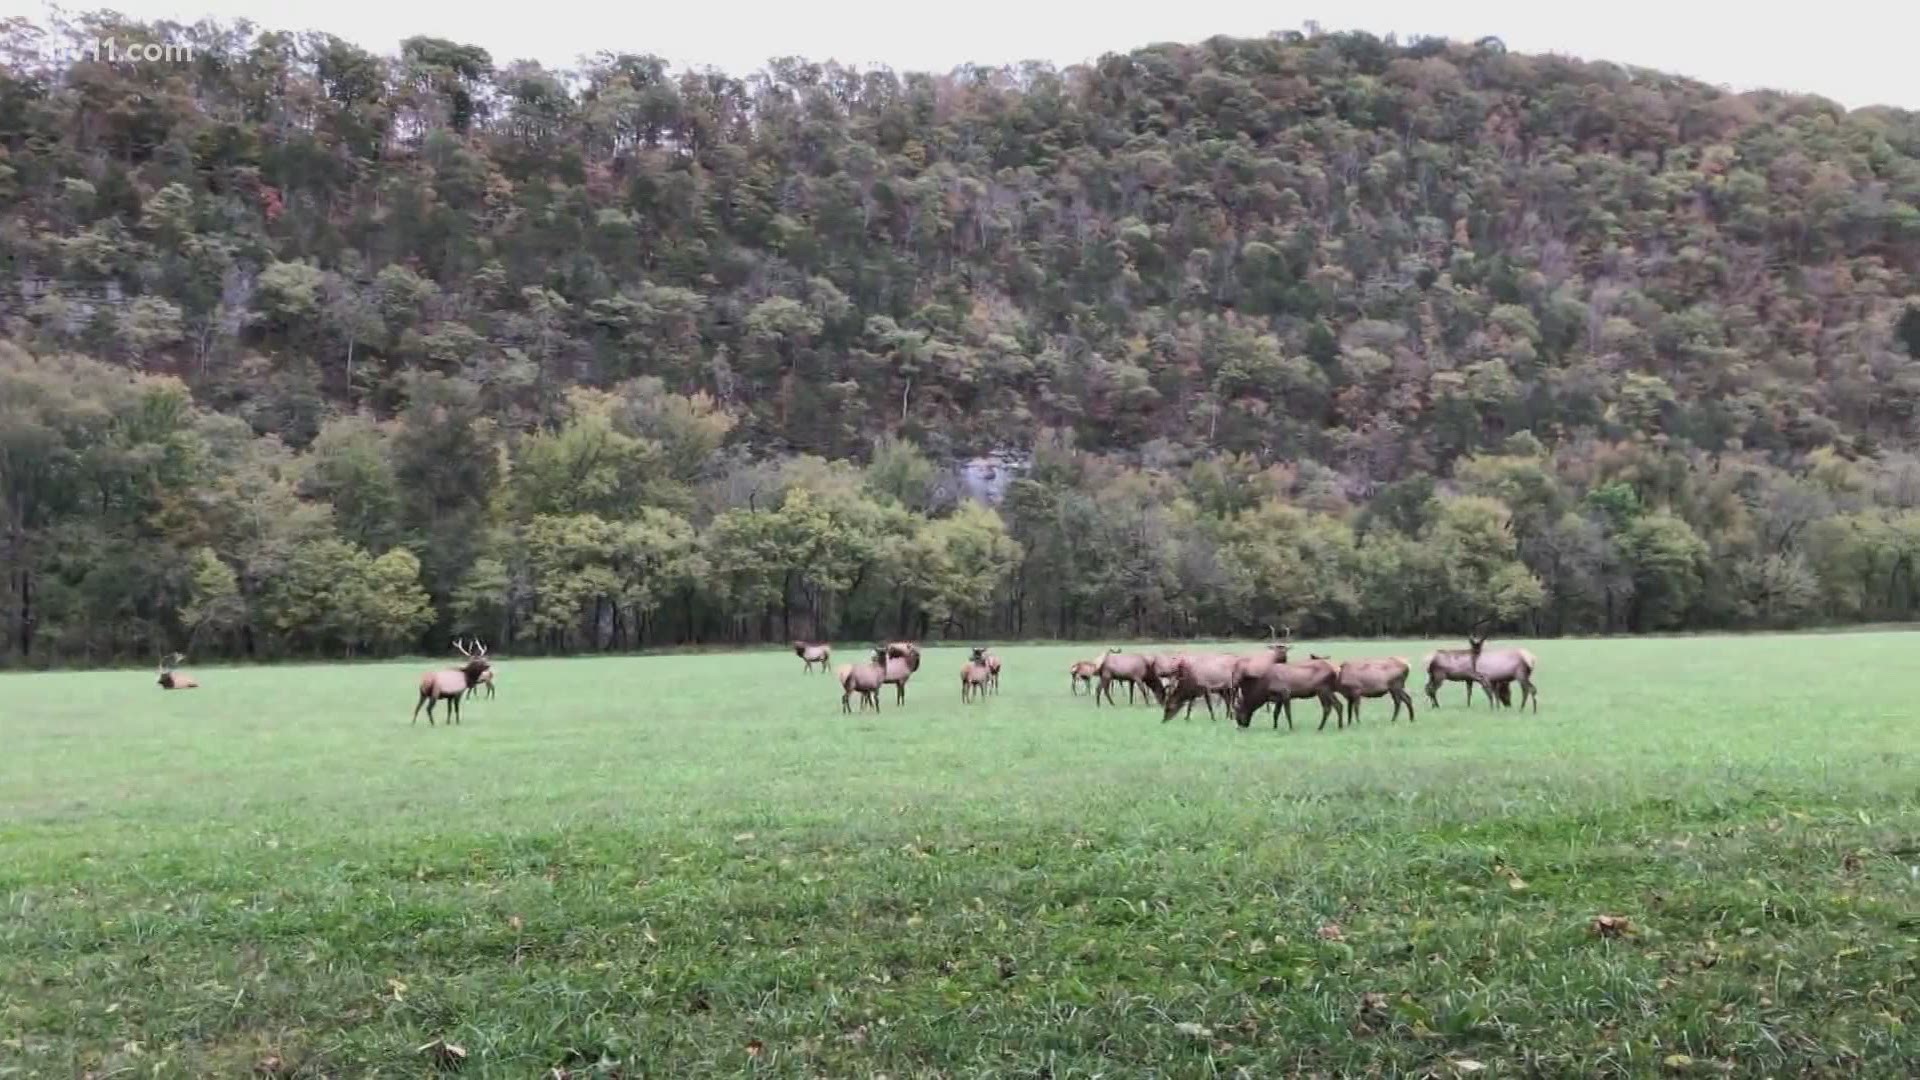 It's that time of year when many Arkansans plan a trip to the northwest part of the state to see the elk and fall colors. But with so many people, officers are busy.